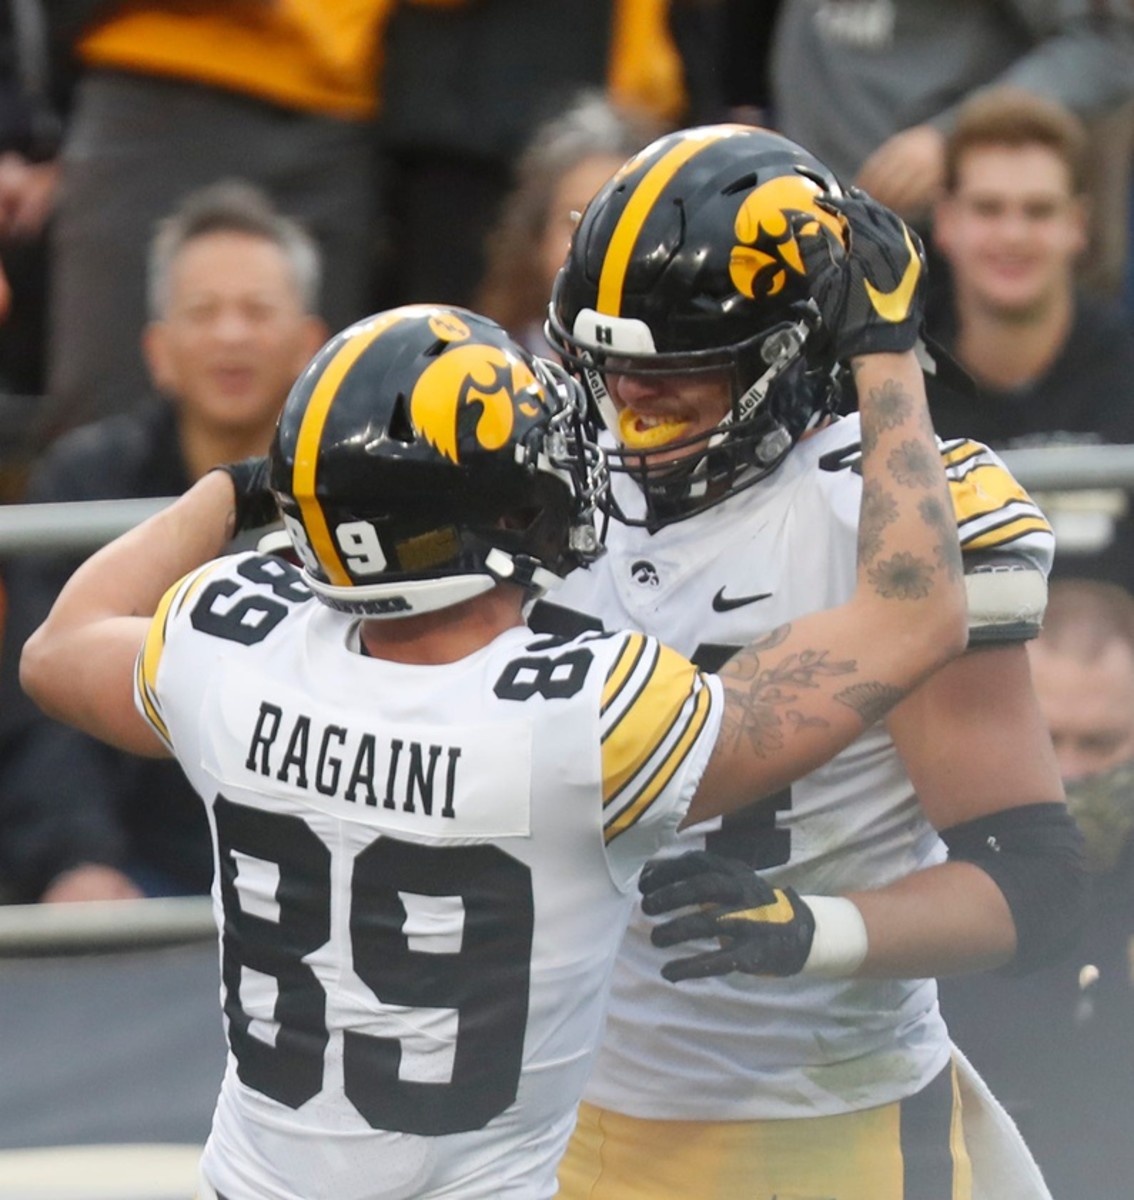 Iowa Hawkeyes tight end Sam LaPorta (84) celebrates with teammate Iowa Hawkeyes wide receiver Nico Ragaini (89) after scoring a touchdown during the NCAA football game against the Purdue Boilermakers, Saturday, Nov. 5, 2022, at Ross-Ade Stadium in West Lafayette, Ind.